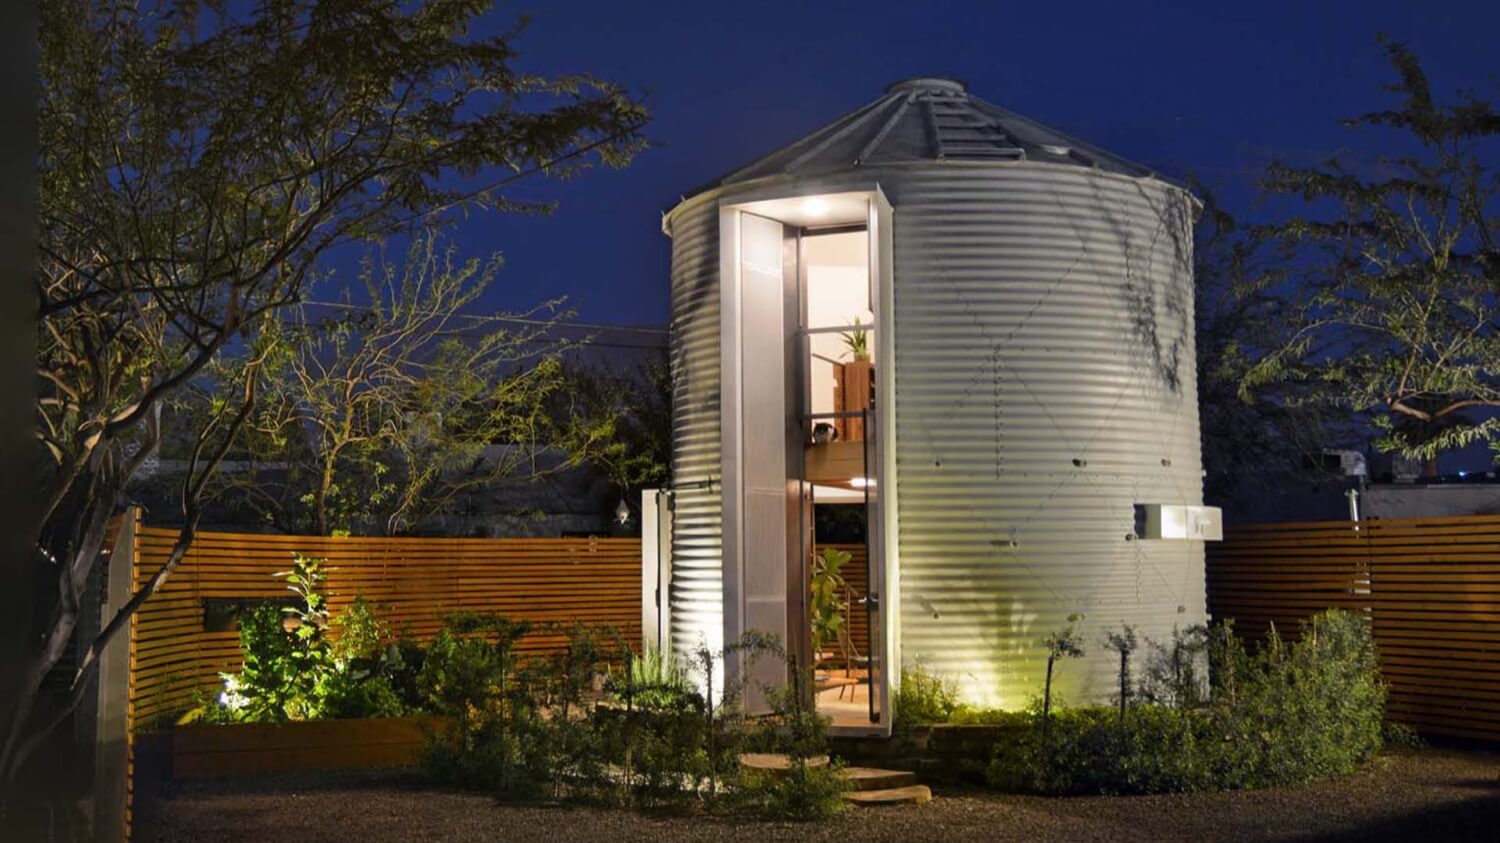 The couple turned a storage for grain in luxury home